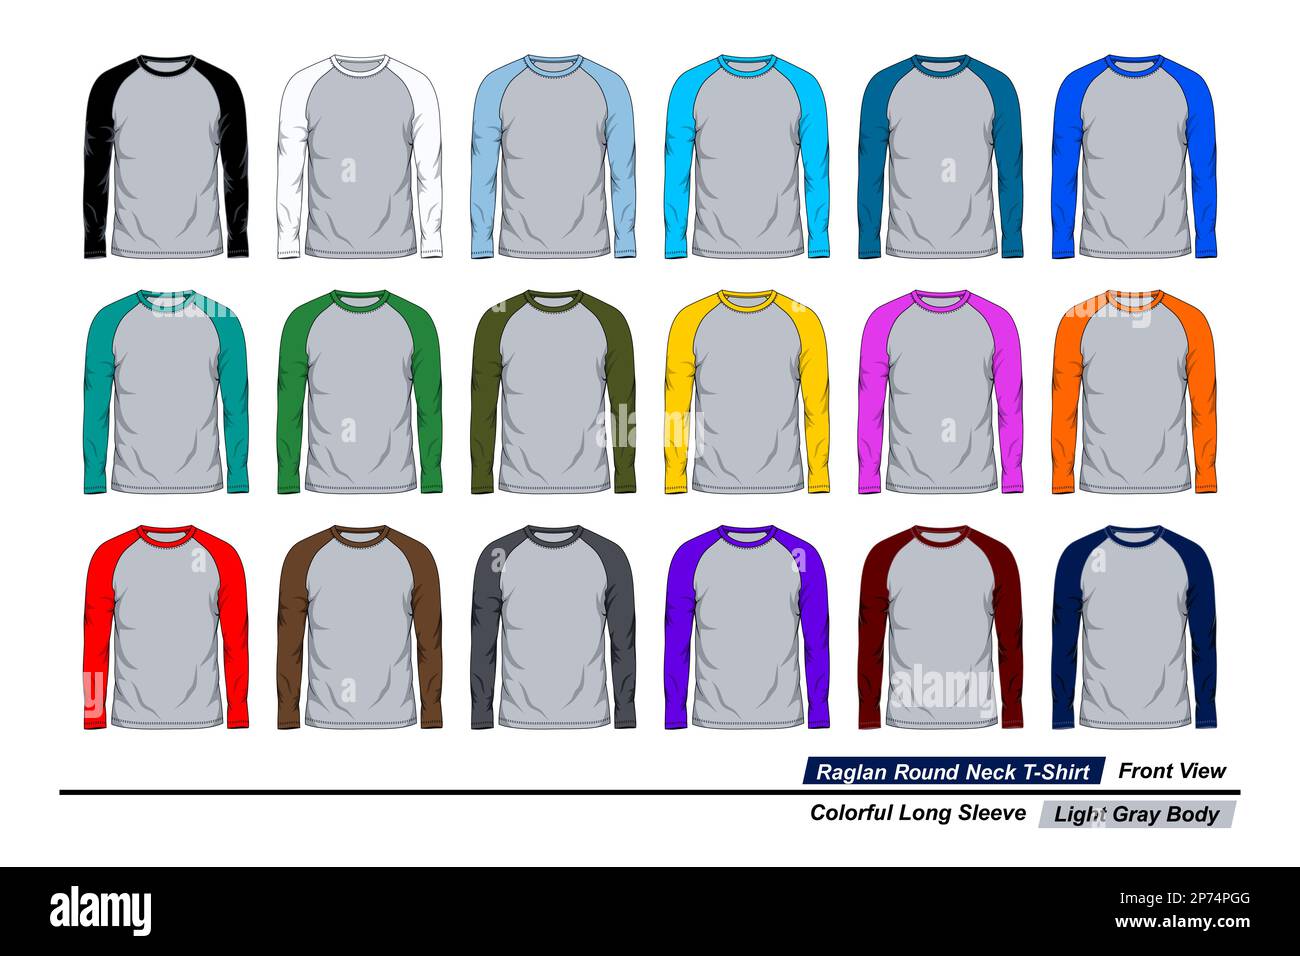 Raglan round neck t-shirt, front view, colorful long sleeve, light gray ...